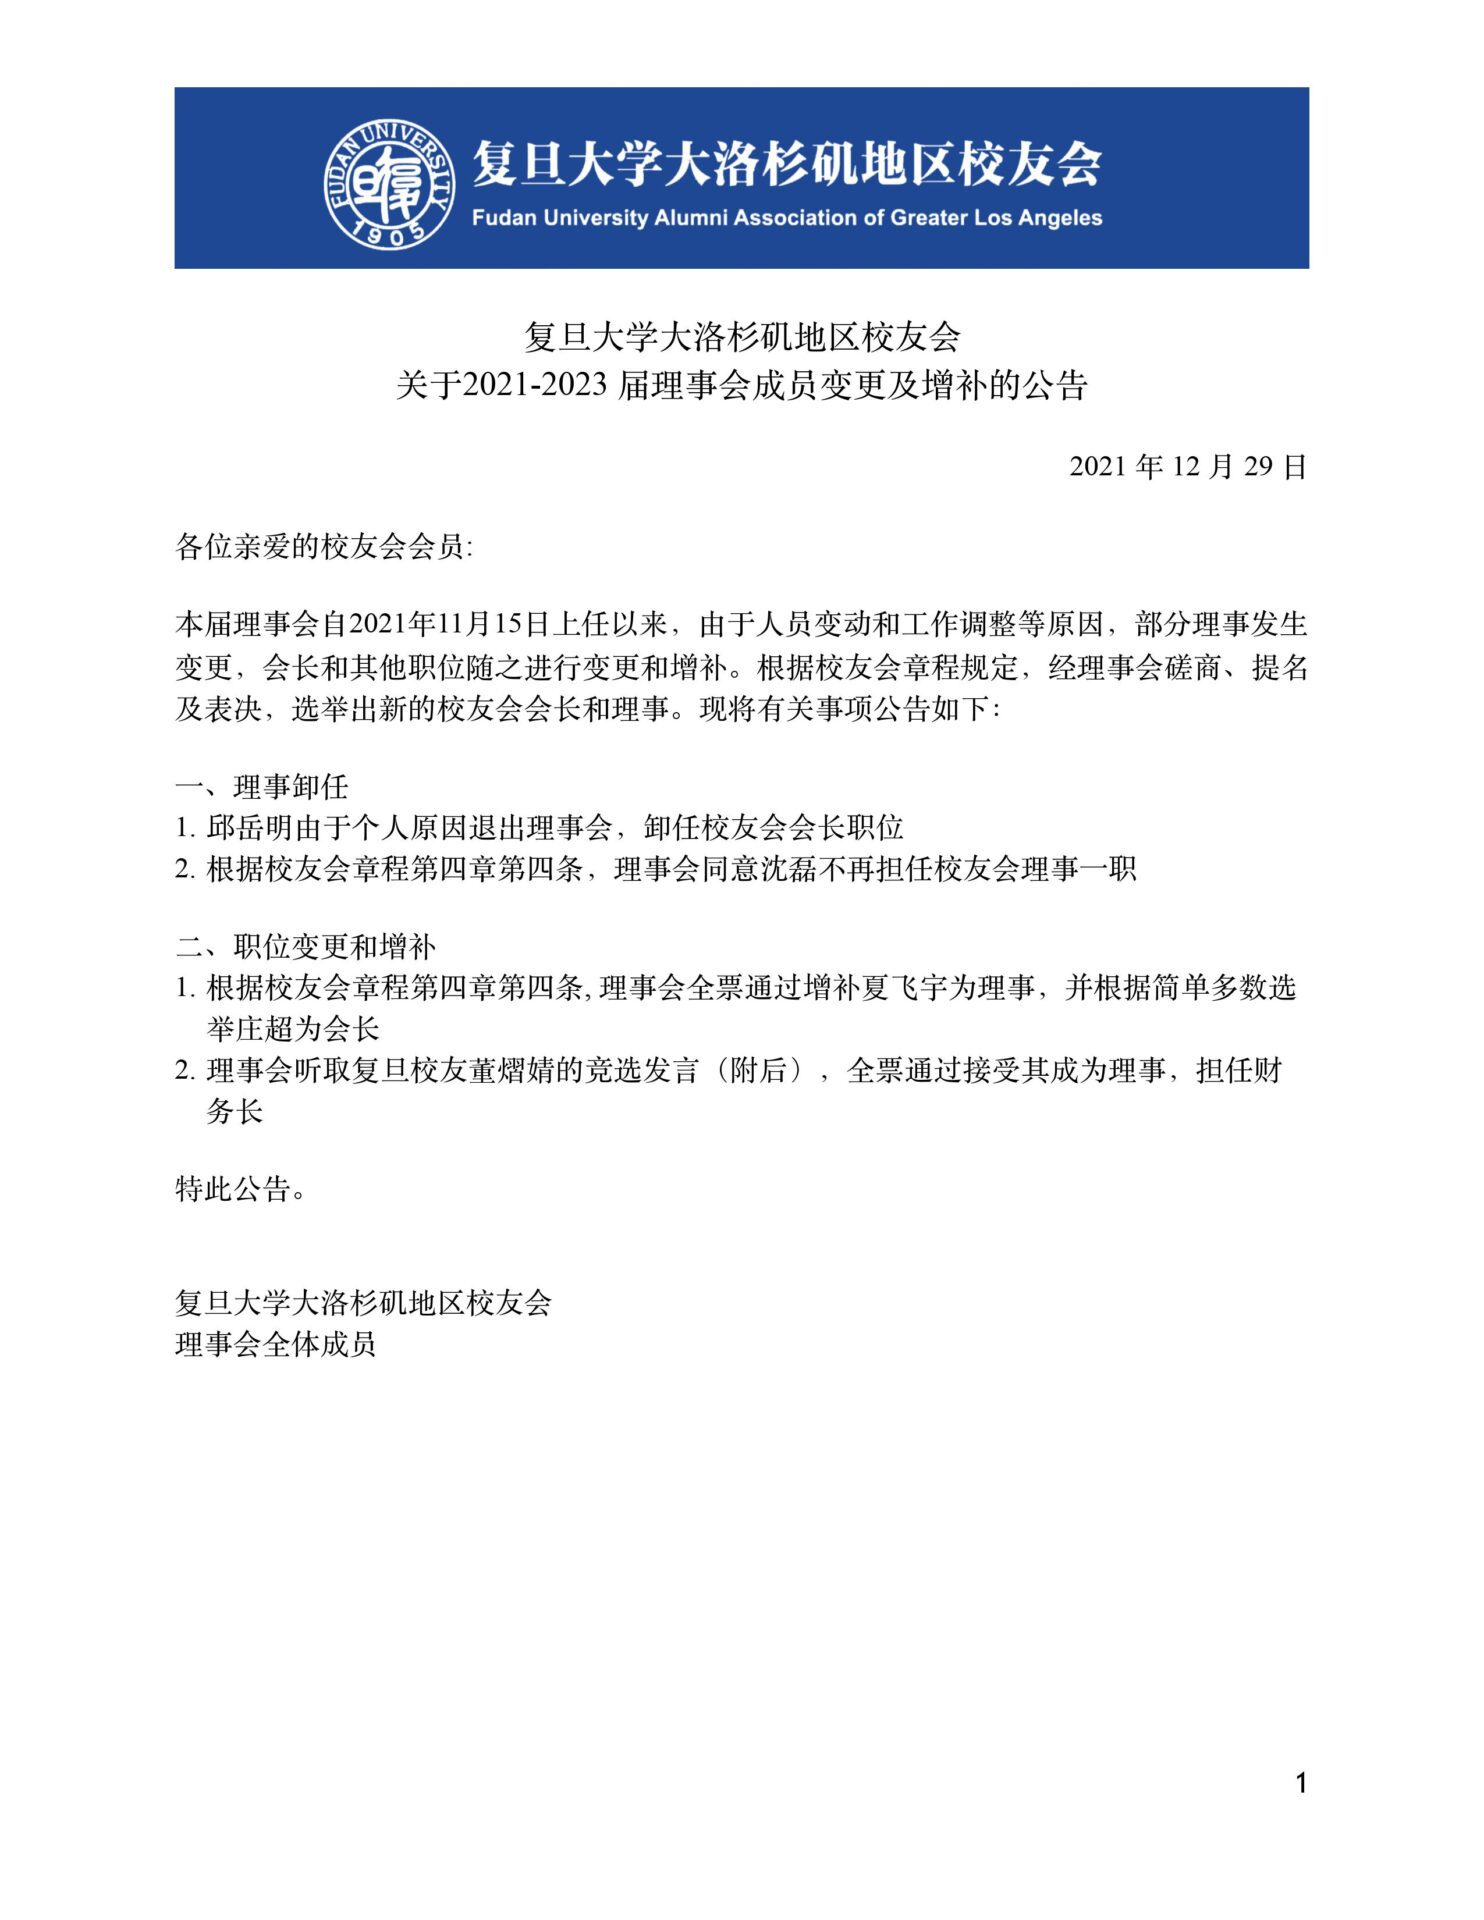 A letter from the chinese government to the people.